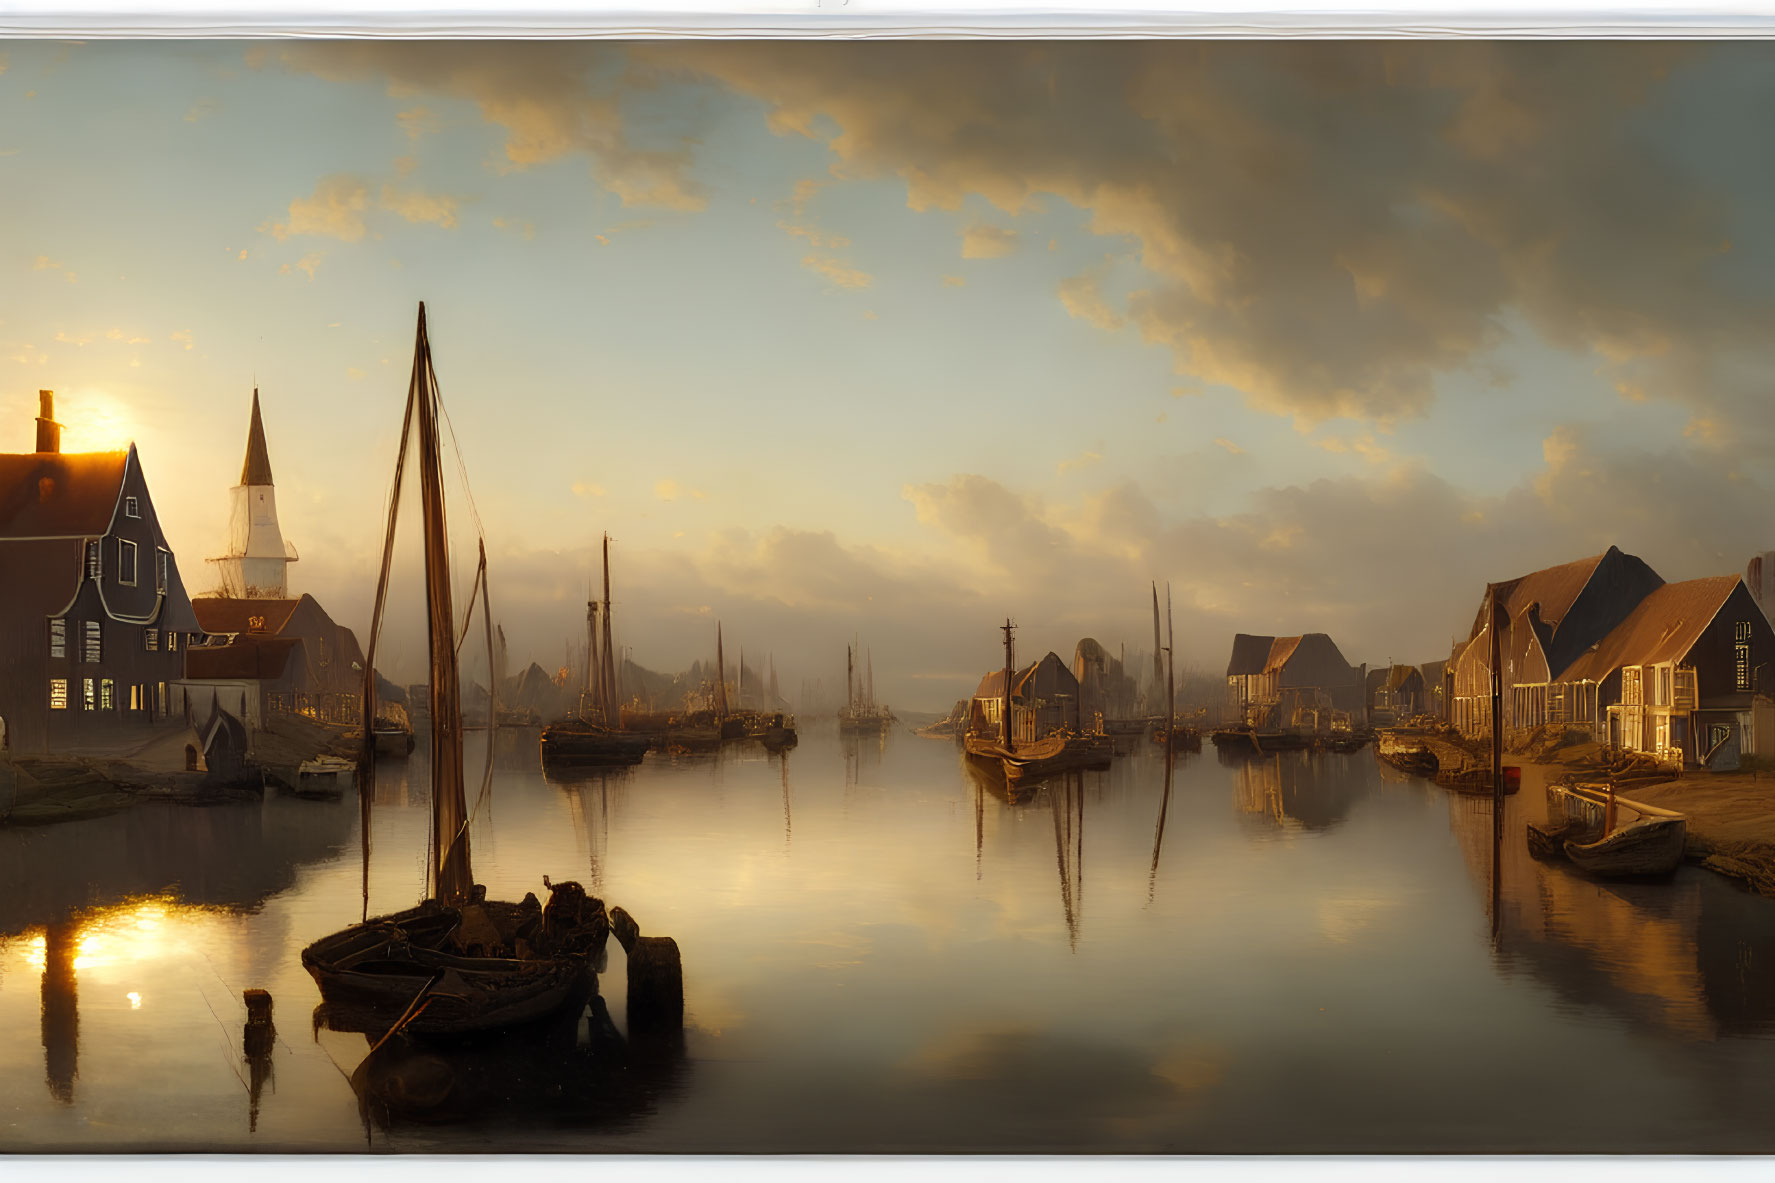 Tranquil coastal village sunset with boats, traditional houses, and calm water